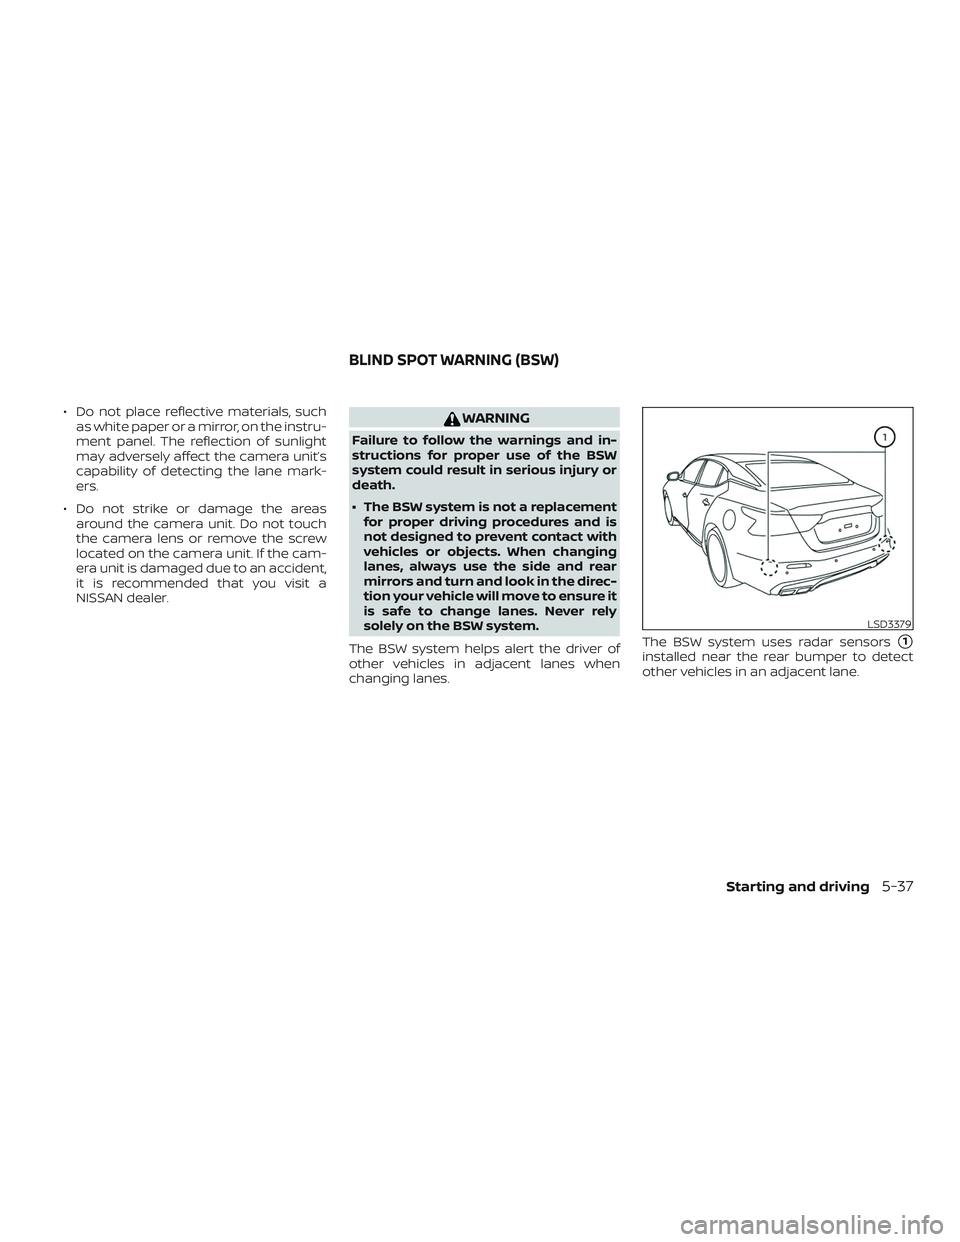 NISSAN MAXIMA 2020  Owner´s Manual ∙ Do not place reflective materials, suchas white paper or a mirror, on the instru-
ment panel. The reflection of sunlight
may adversely affect the camera unit’s
capability of detecting the lane m